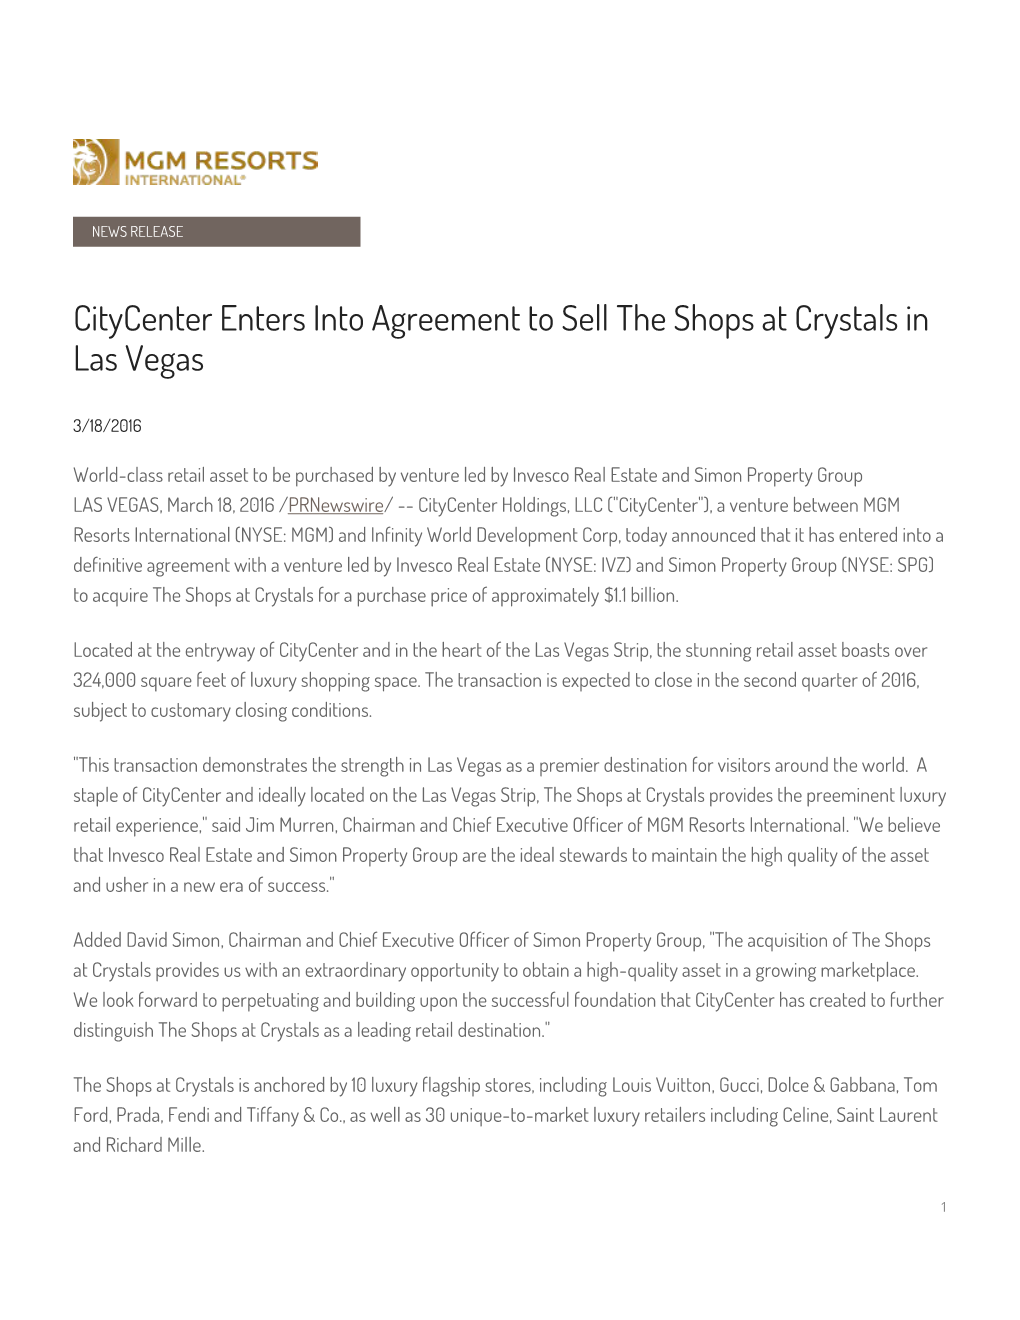 Citycenter Enters Into Agreement to Sell the Shops at Crystals in Las Vegas